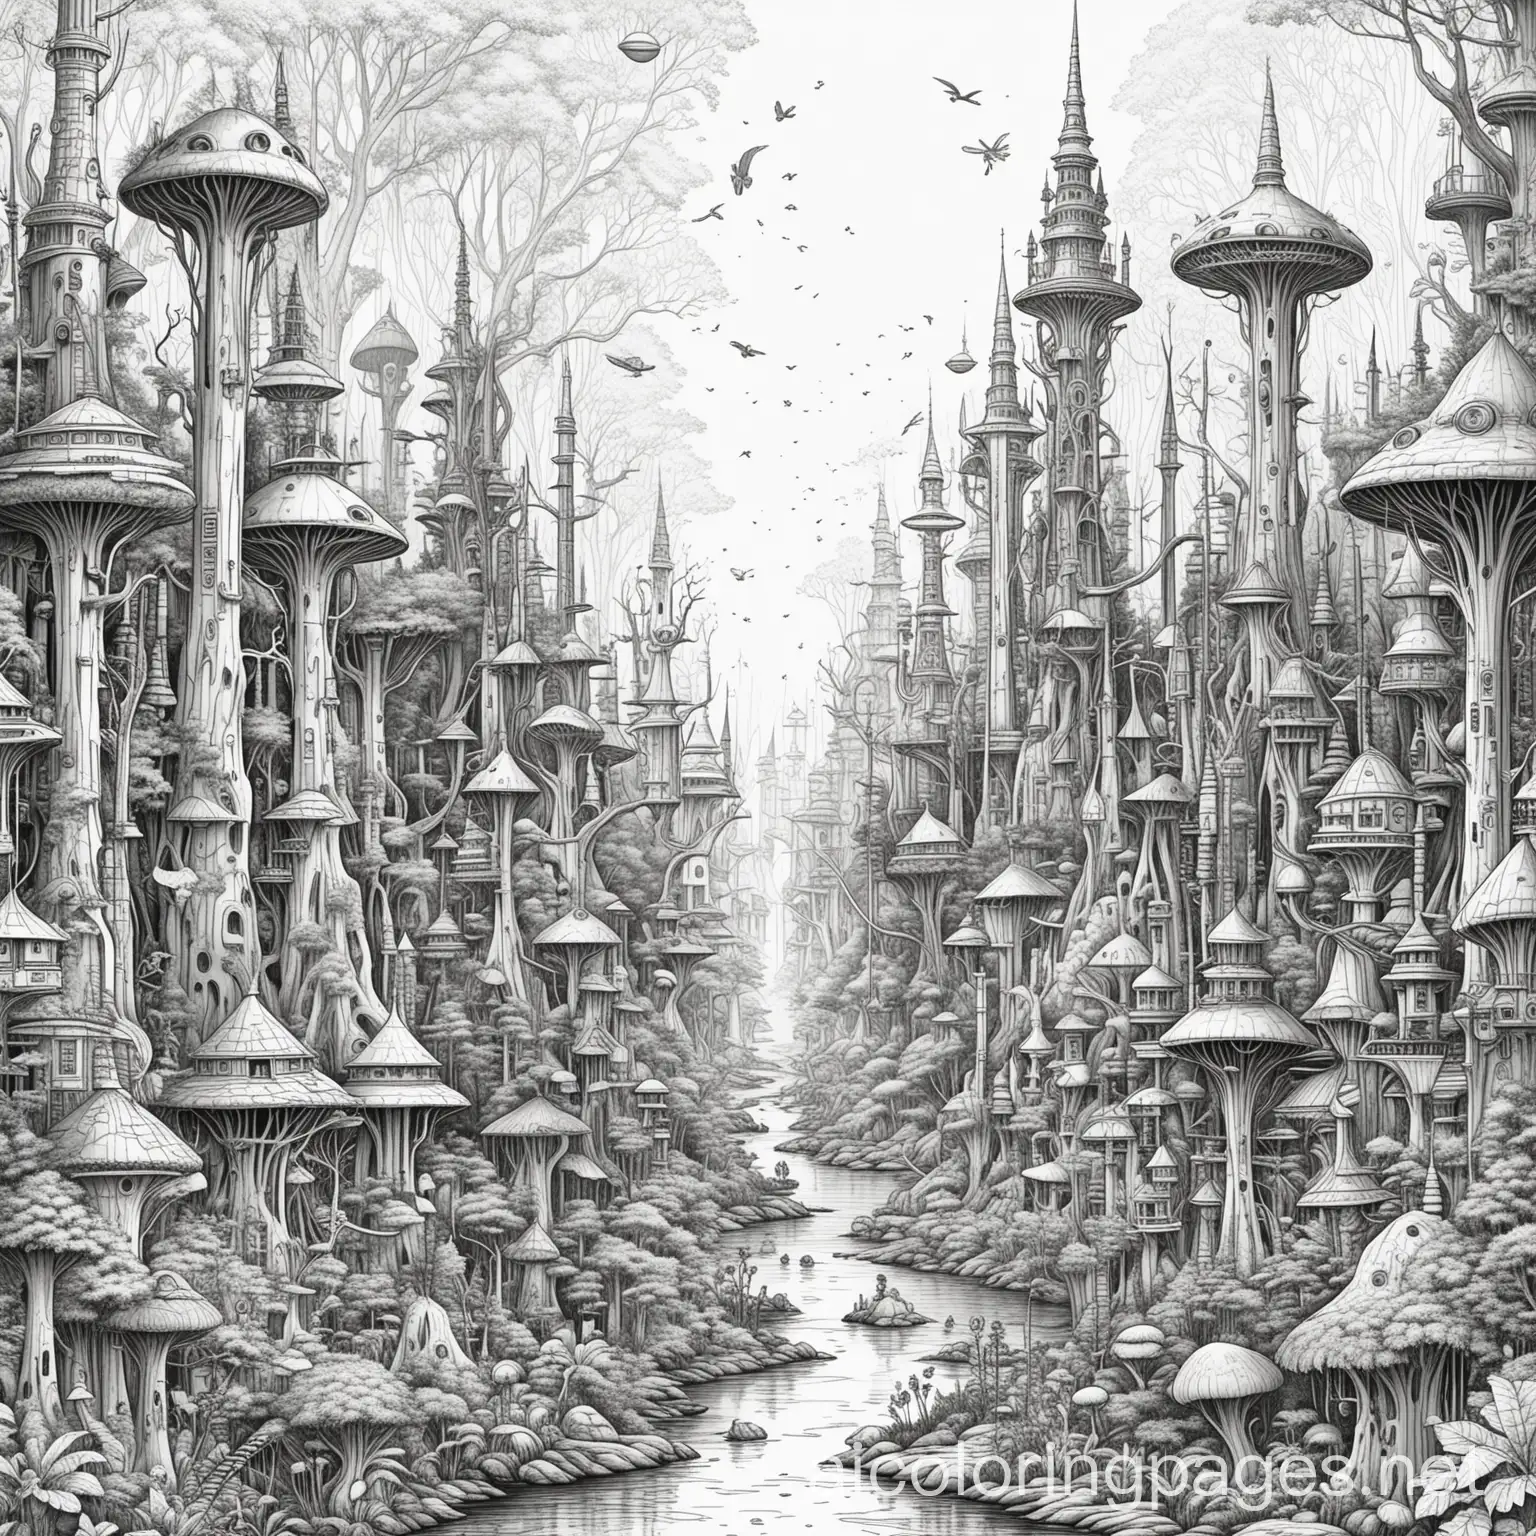 magical forest city with tall aliens, Coloring Page, black and white, line art, white background, Simplicity, Ample White Space. The background of the coloring page is plain white to make it easy for young children to color within the lines. The outlines of all the subjects are easy to distinguish, making it simple for kids to color without too much difficulty